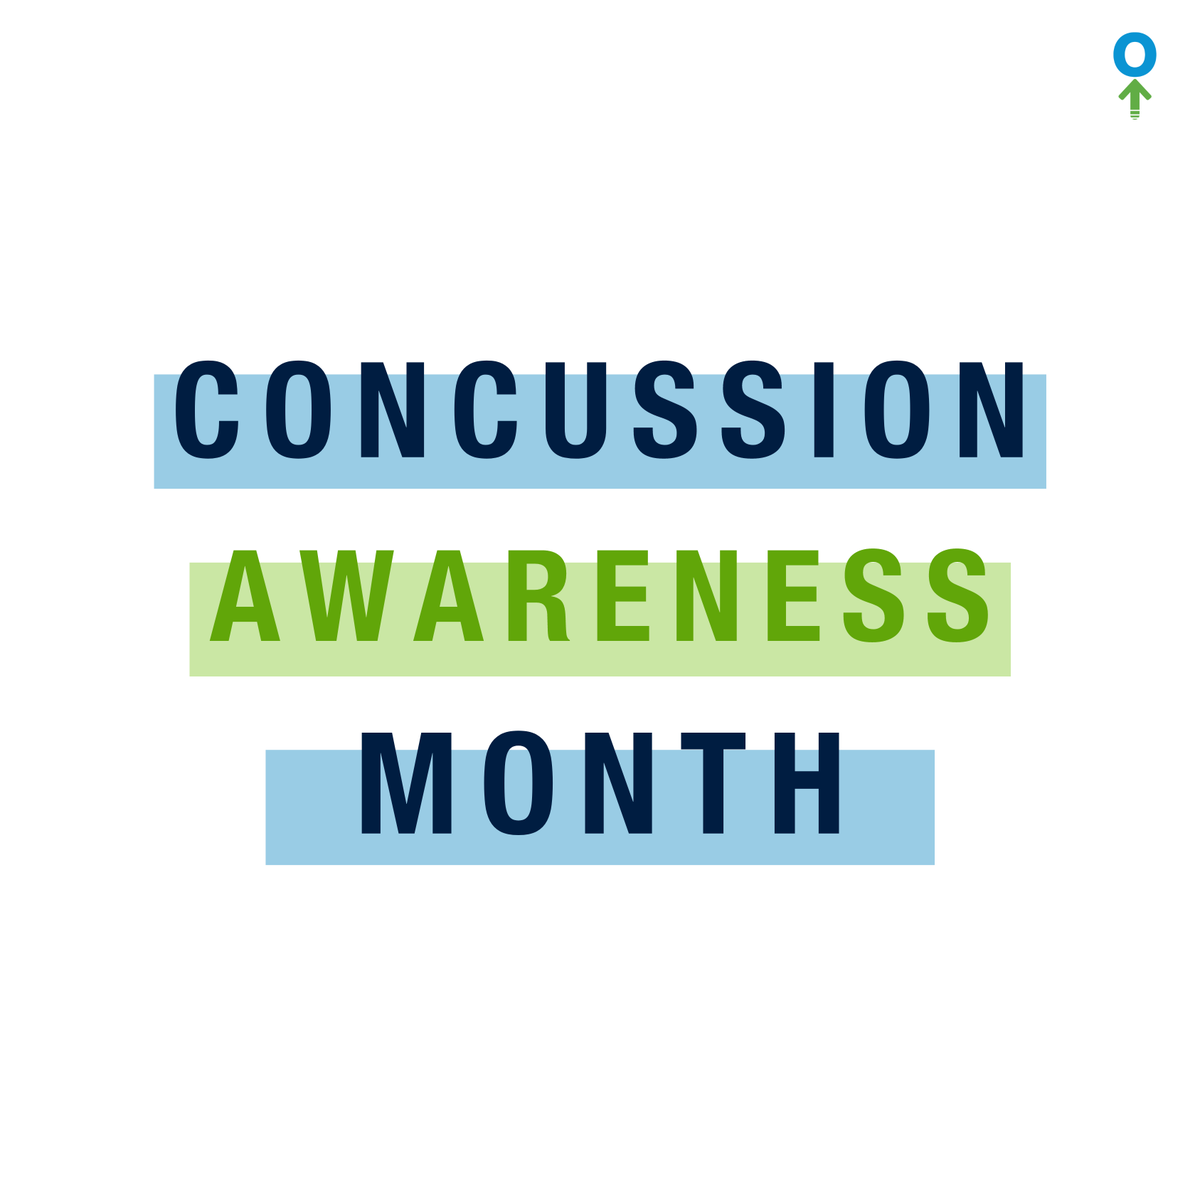 September 1 marks the beginning of Concussion Awareness Month. Follow as we raise awareness for these “invisible injuries” and offer inspiration for concussion recovery. Please continue to share these posts with anyone who may find them helpful!